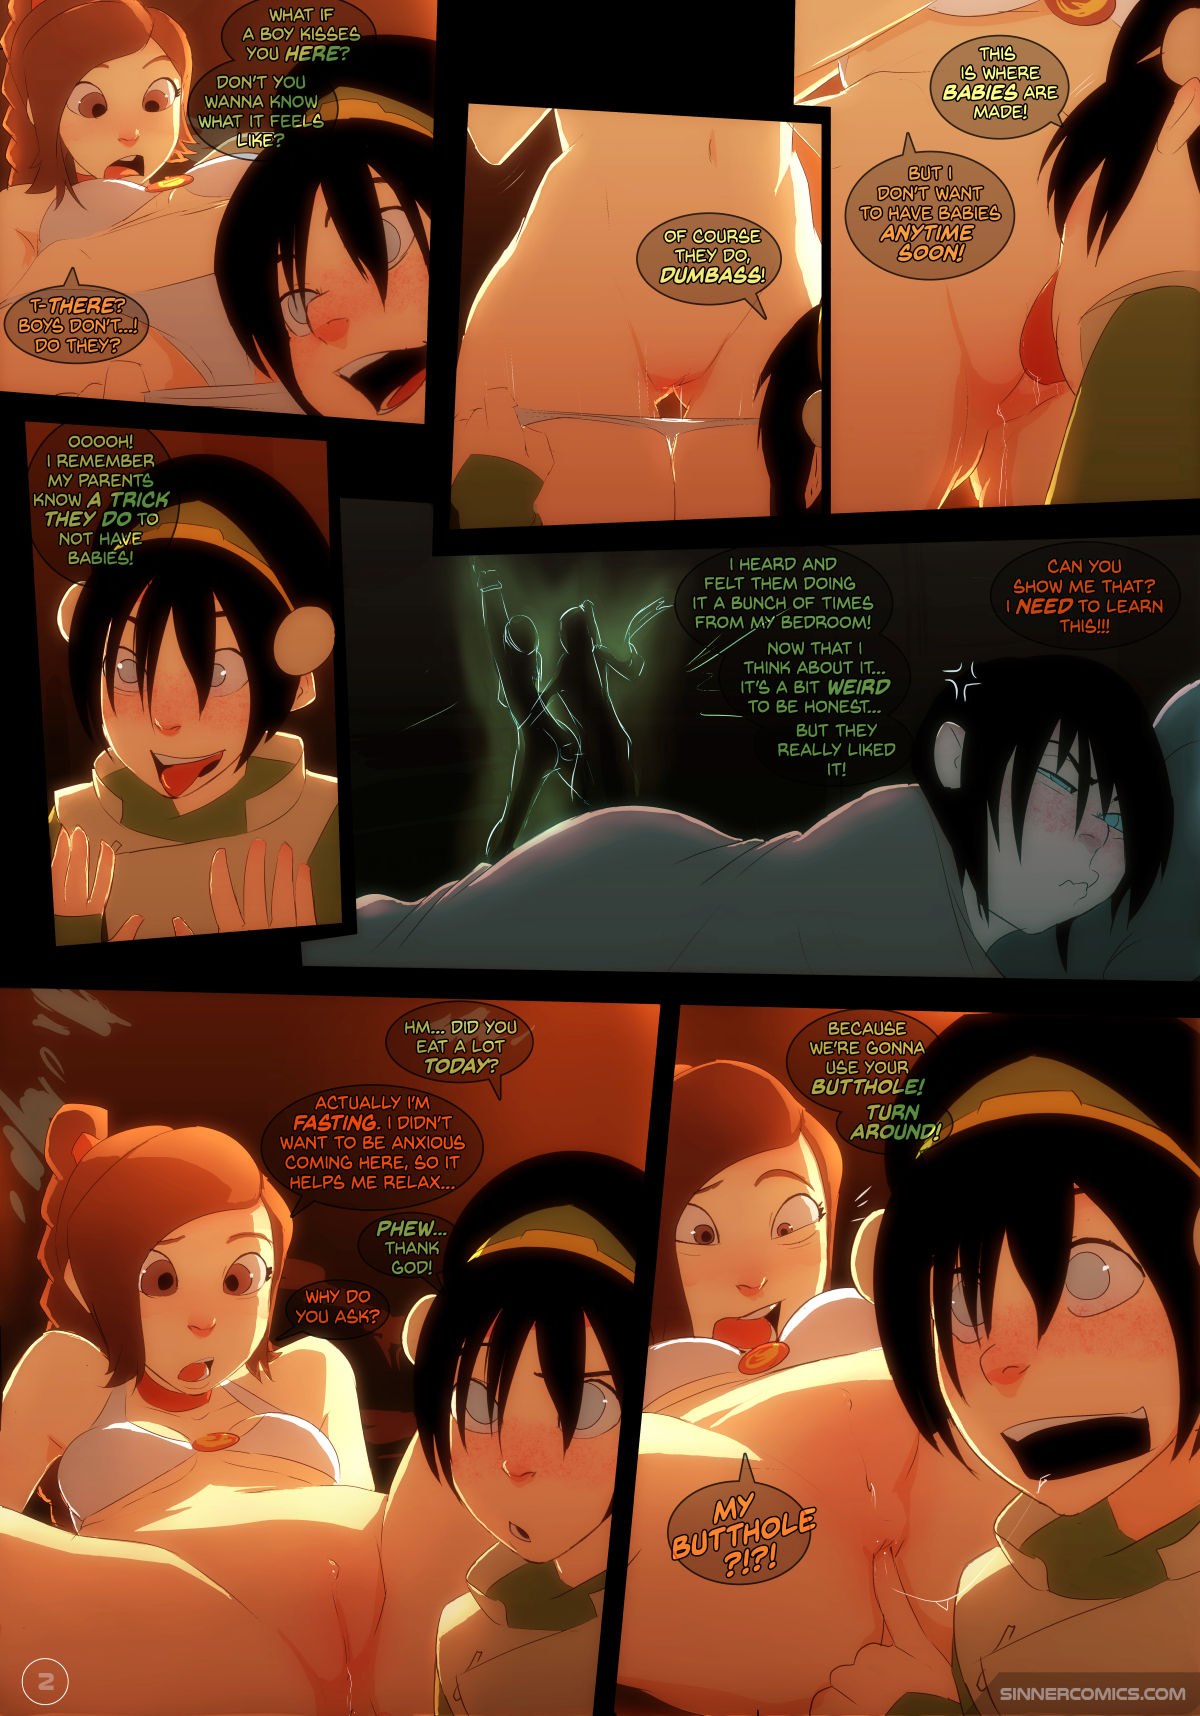 sillygirl toph vs. Ty lee(avatar の 昨 airbender)